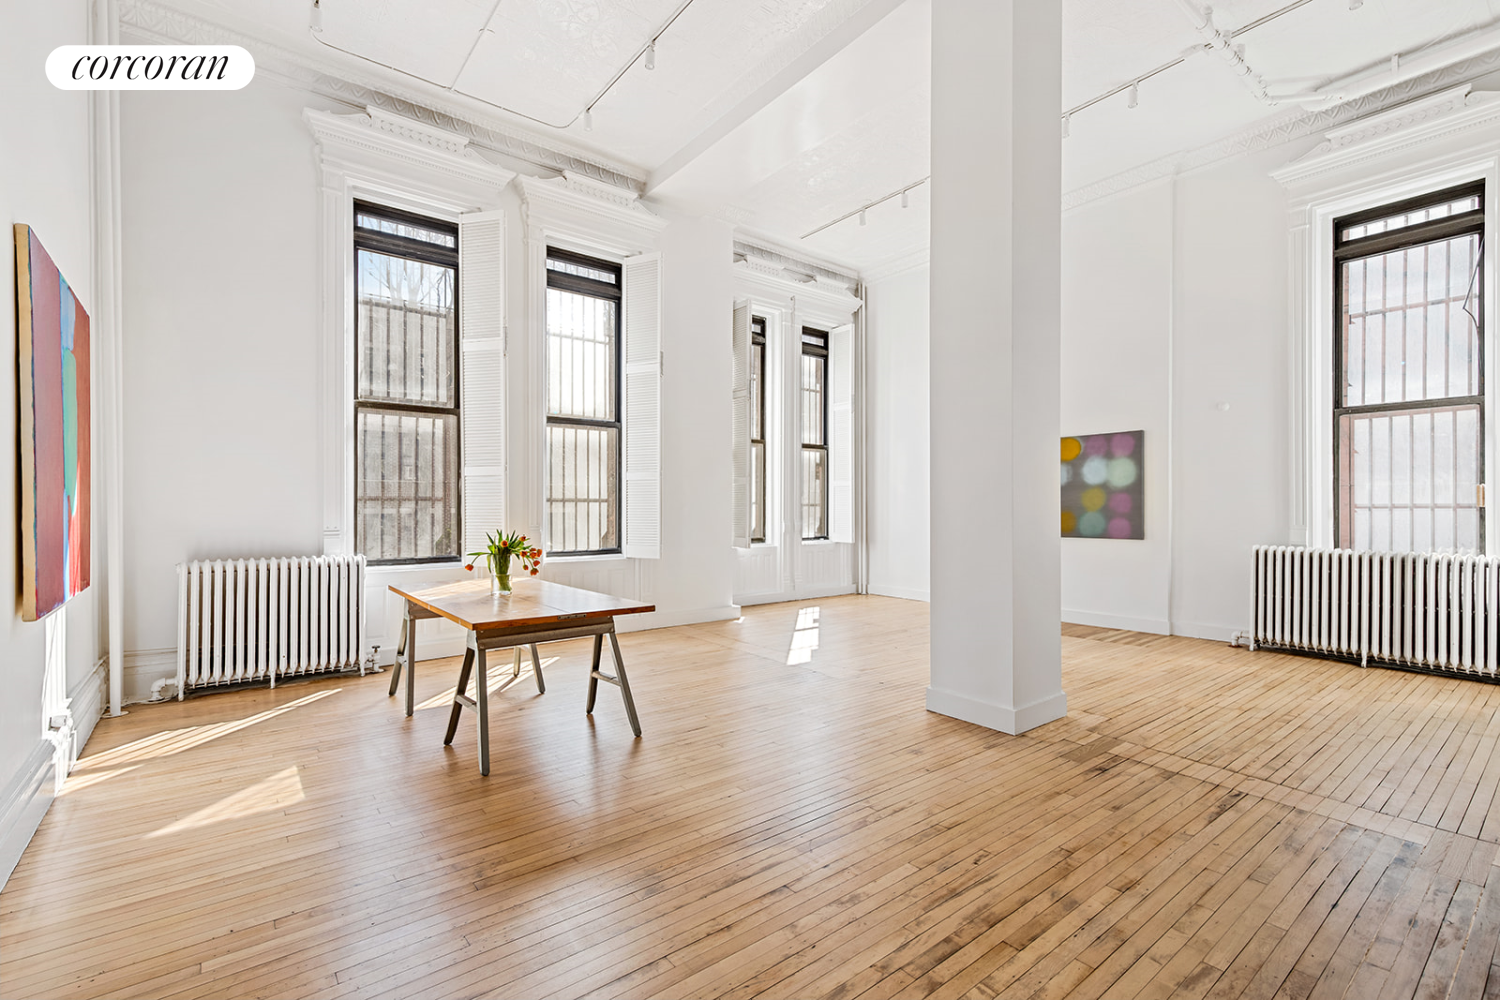 143 South 8th Street 1A, Williamsburg, Brooklyn, New York - 2 Bedrooms  
2 Bathrooms  
5 Rooms - 